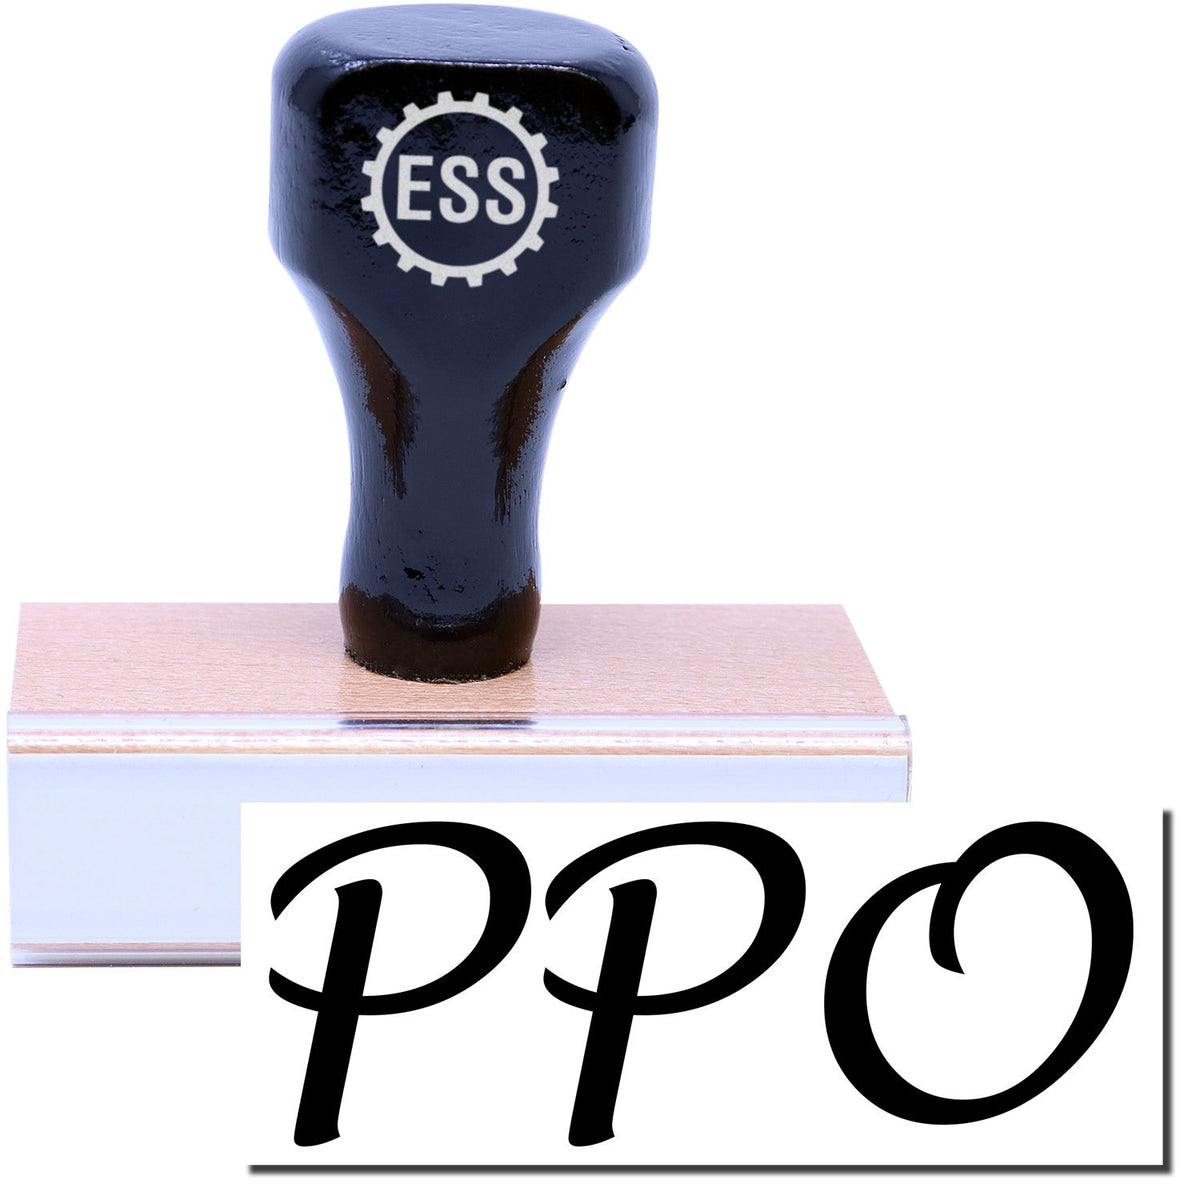 A stock office rubber stamp with a stamped image showing how the text &quot;PPO&quot; in a large font is displayed after stamping.